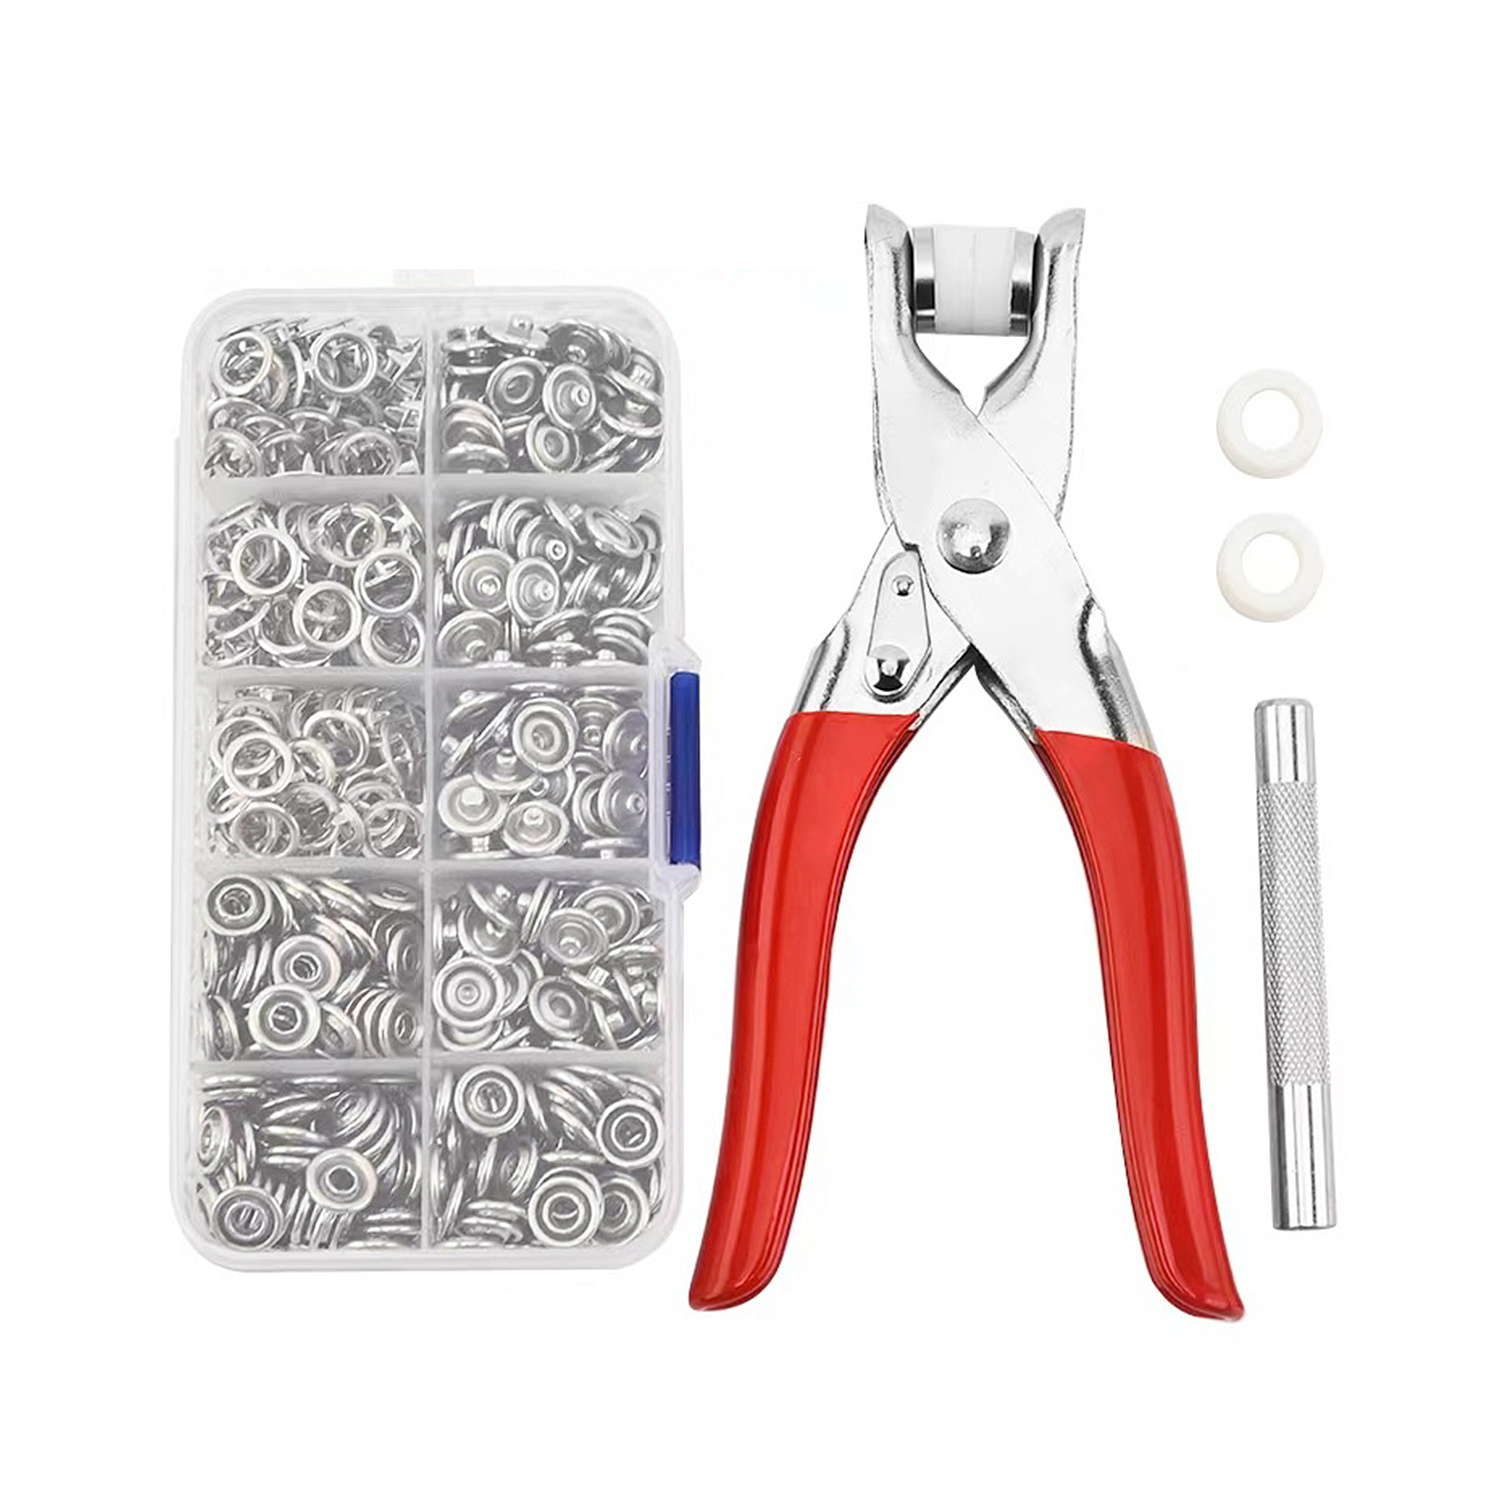  Kamtop Snaps and Snap Pliers Set, 408 Sets T5 Plastic Snap  Buttons 24 Colors, Snap Fasteners Snap Press Pliers Snaps Starter Kit Snap  Setter Tool for Clothes Sewing Bibs Rain Coat